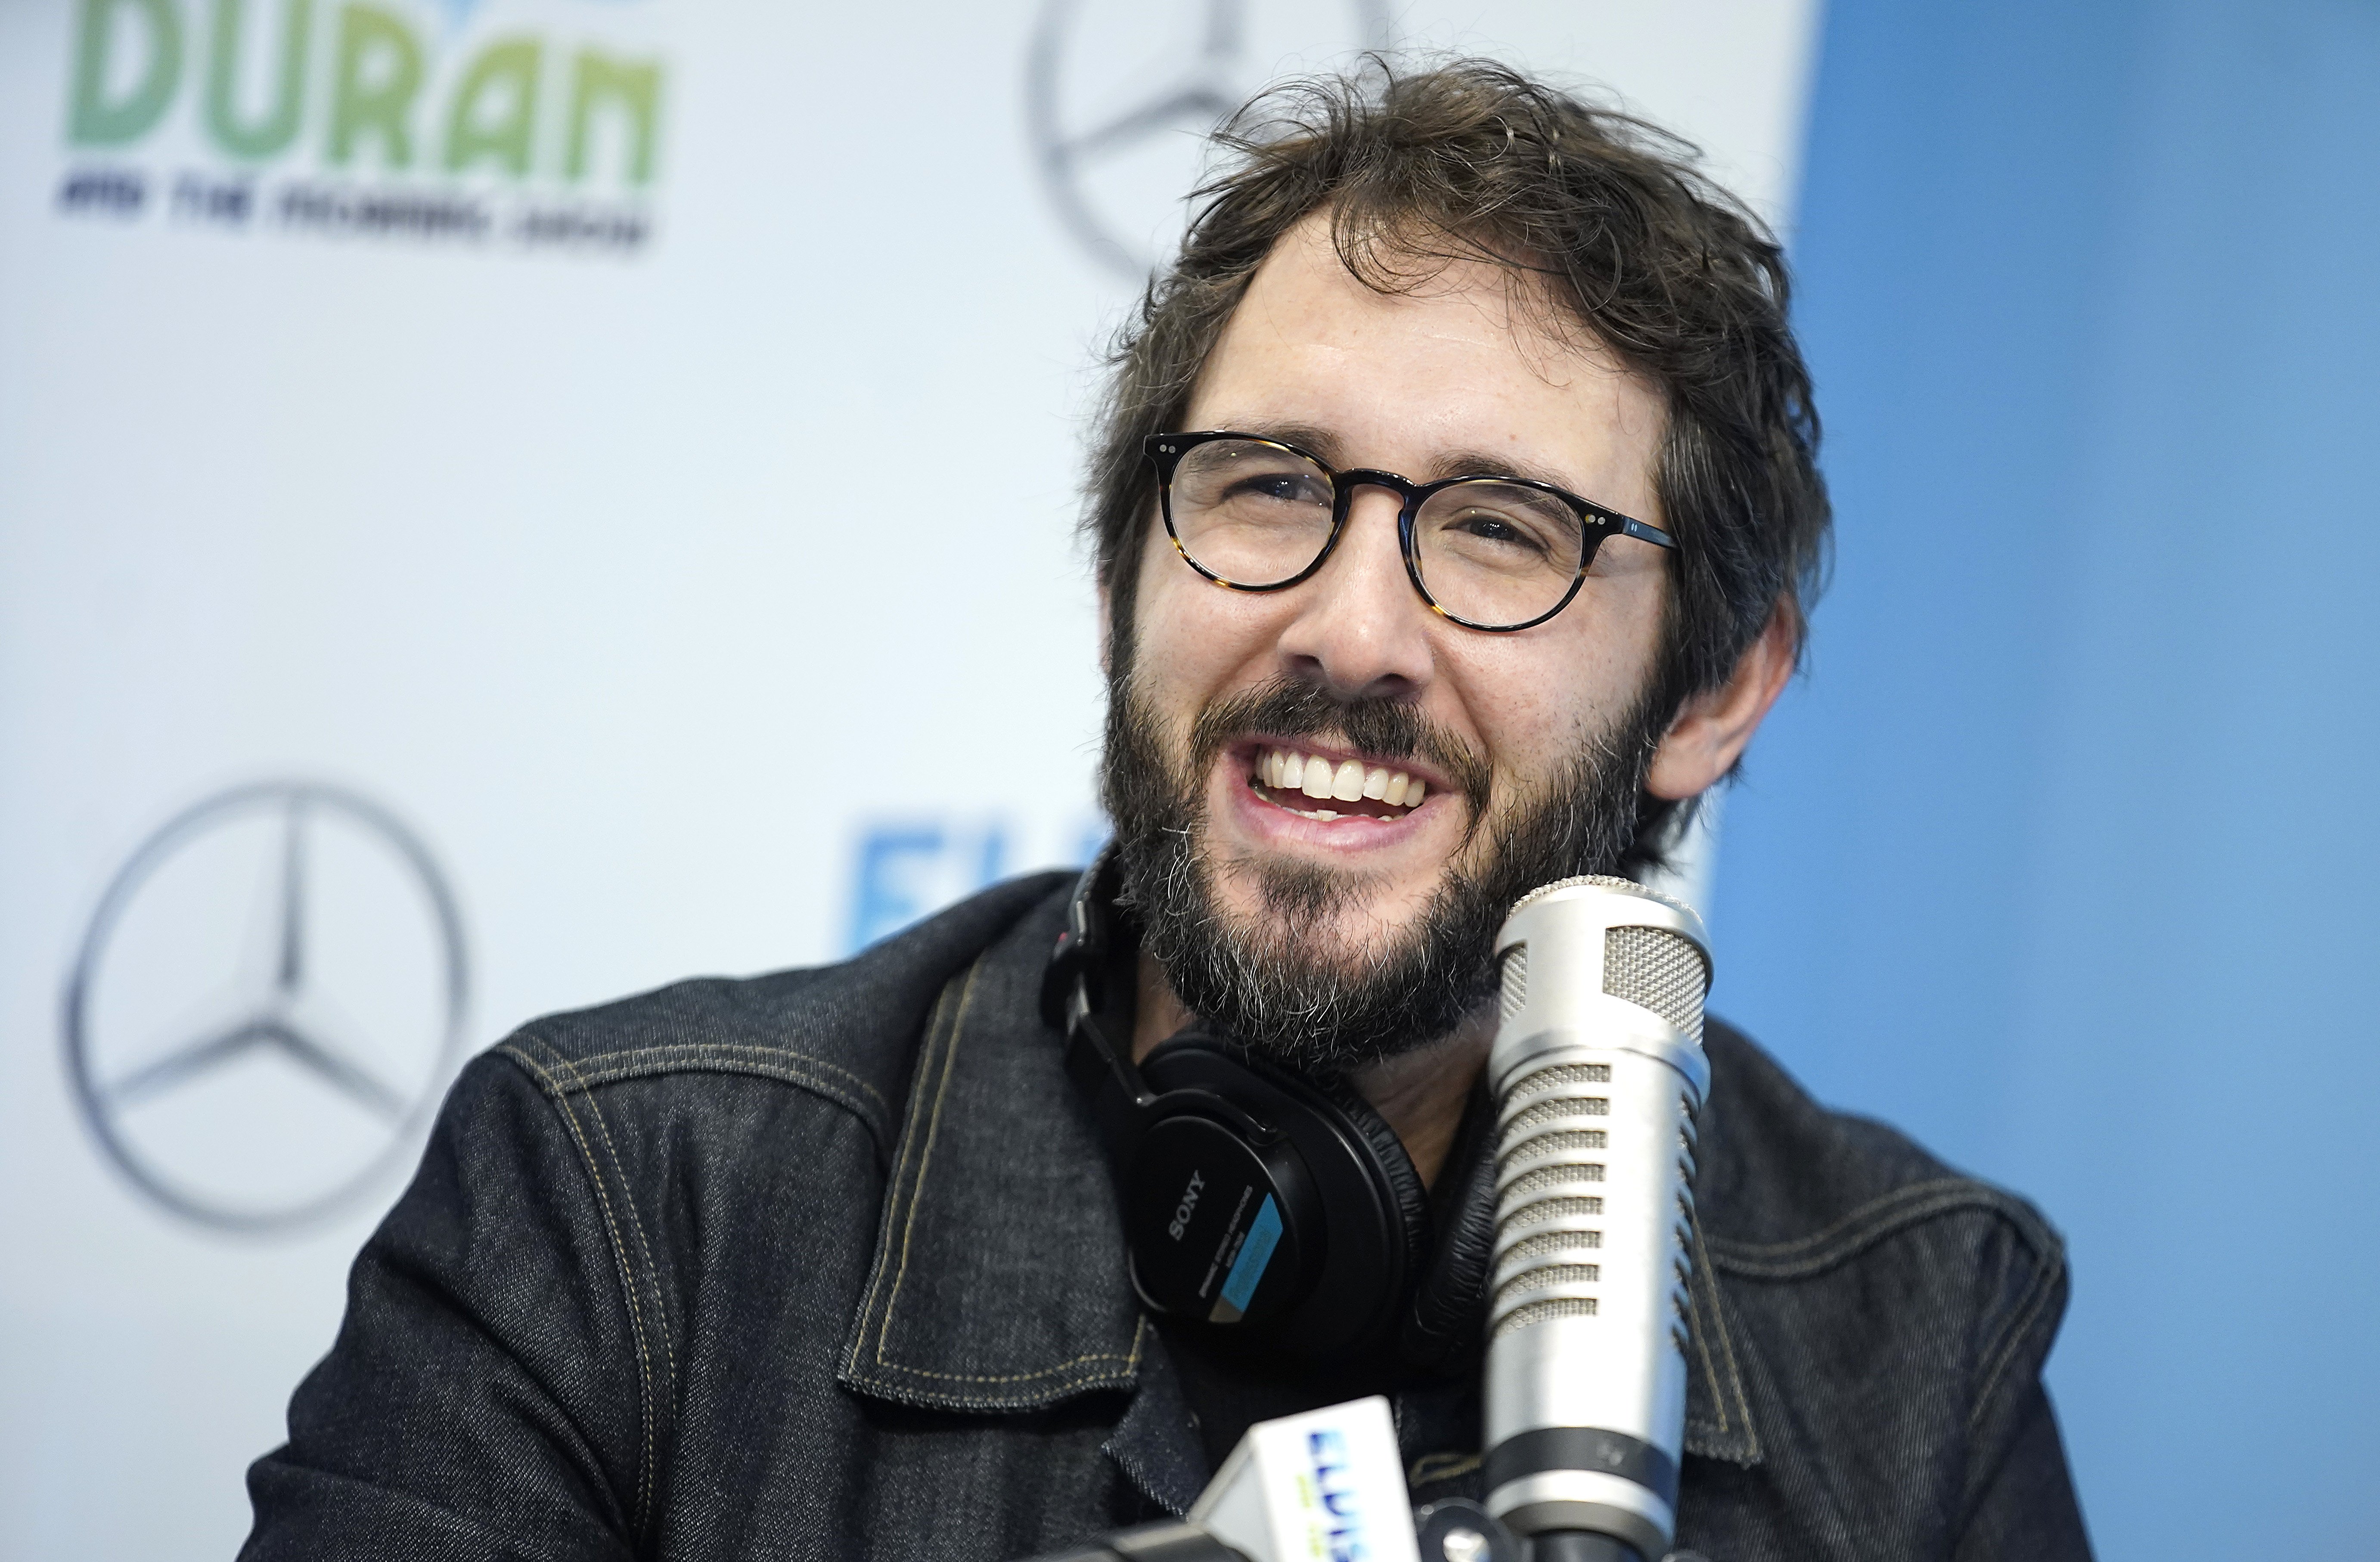 Josh Groban visits "The Elvis Duran Z100 Morning Show" at Z100 Studio on October 11, 2019 in New York City | Photo: Getty Images